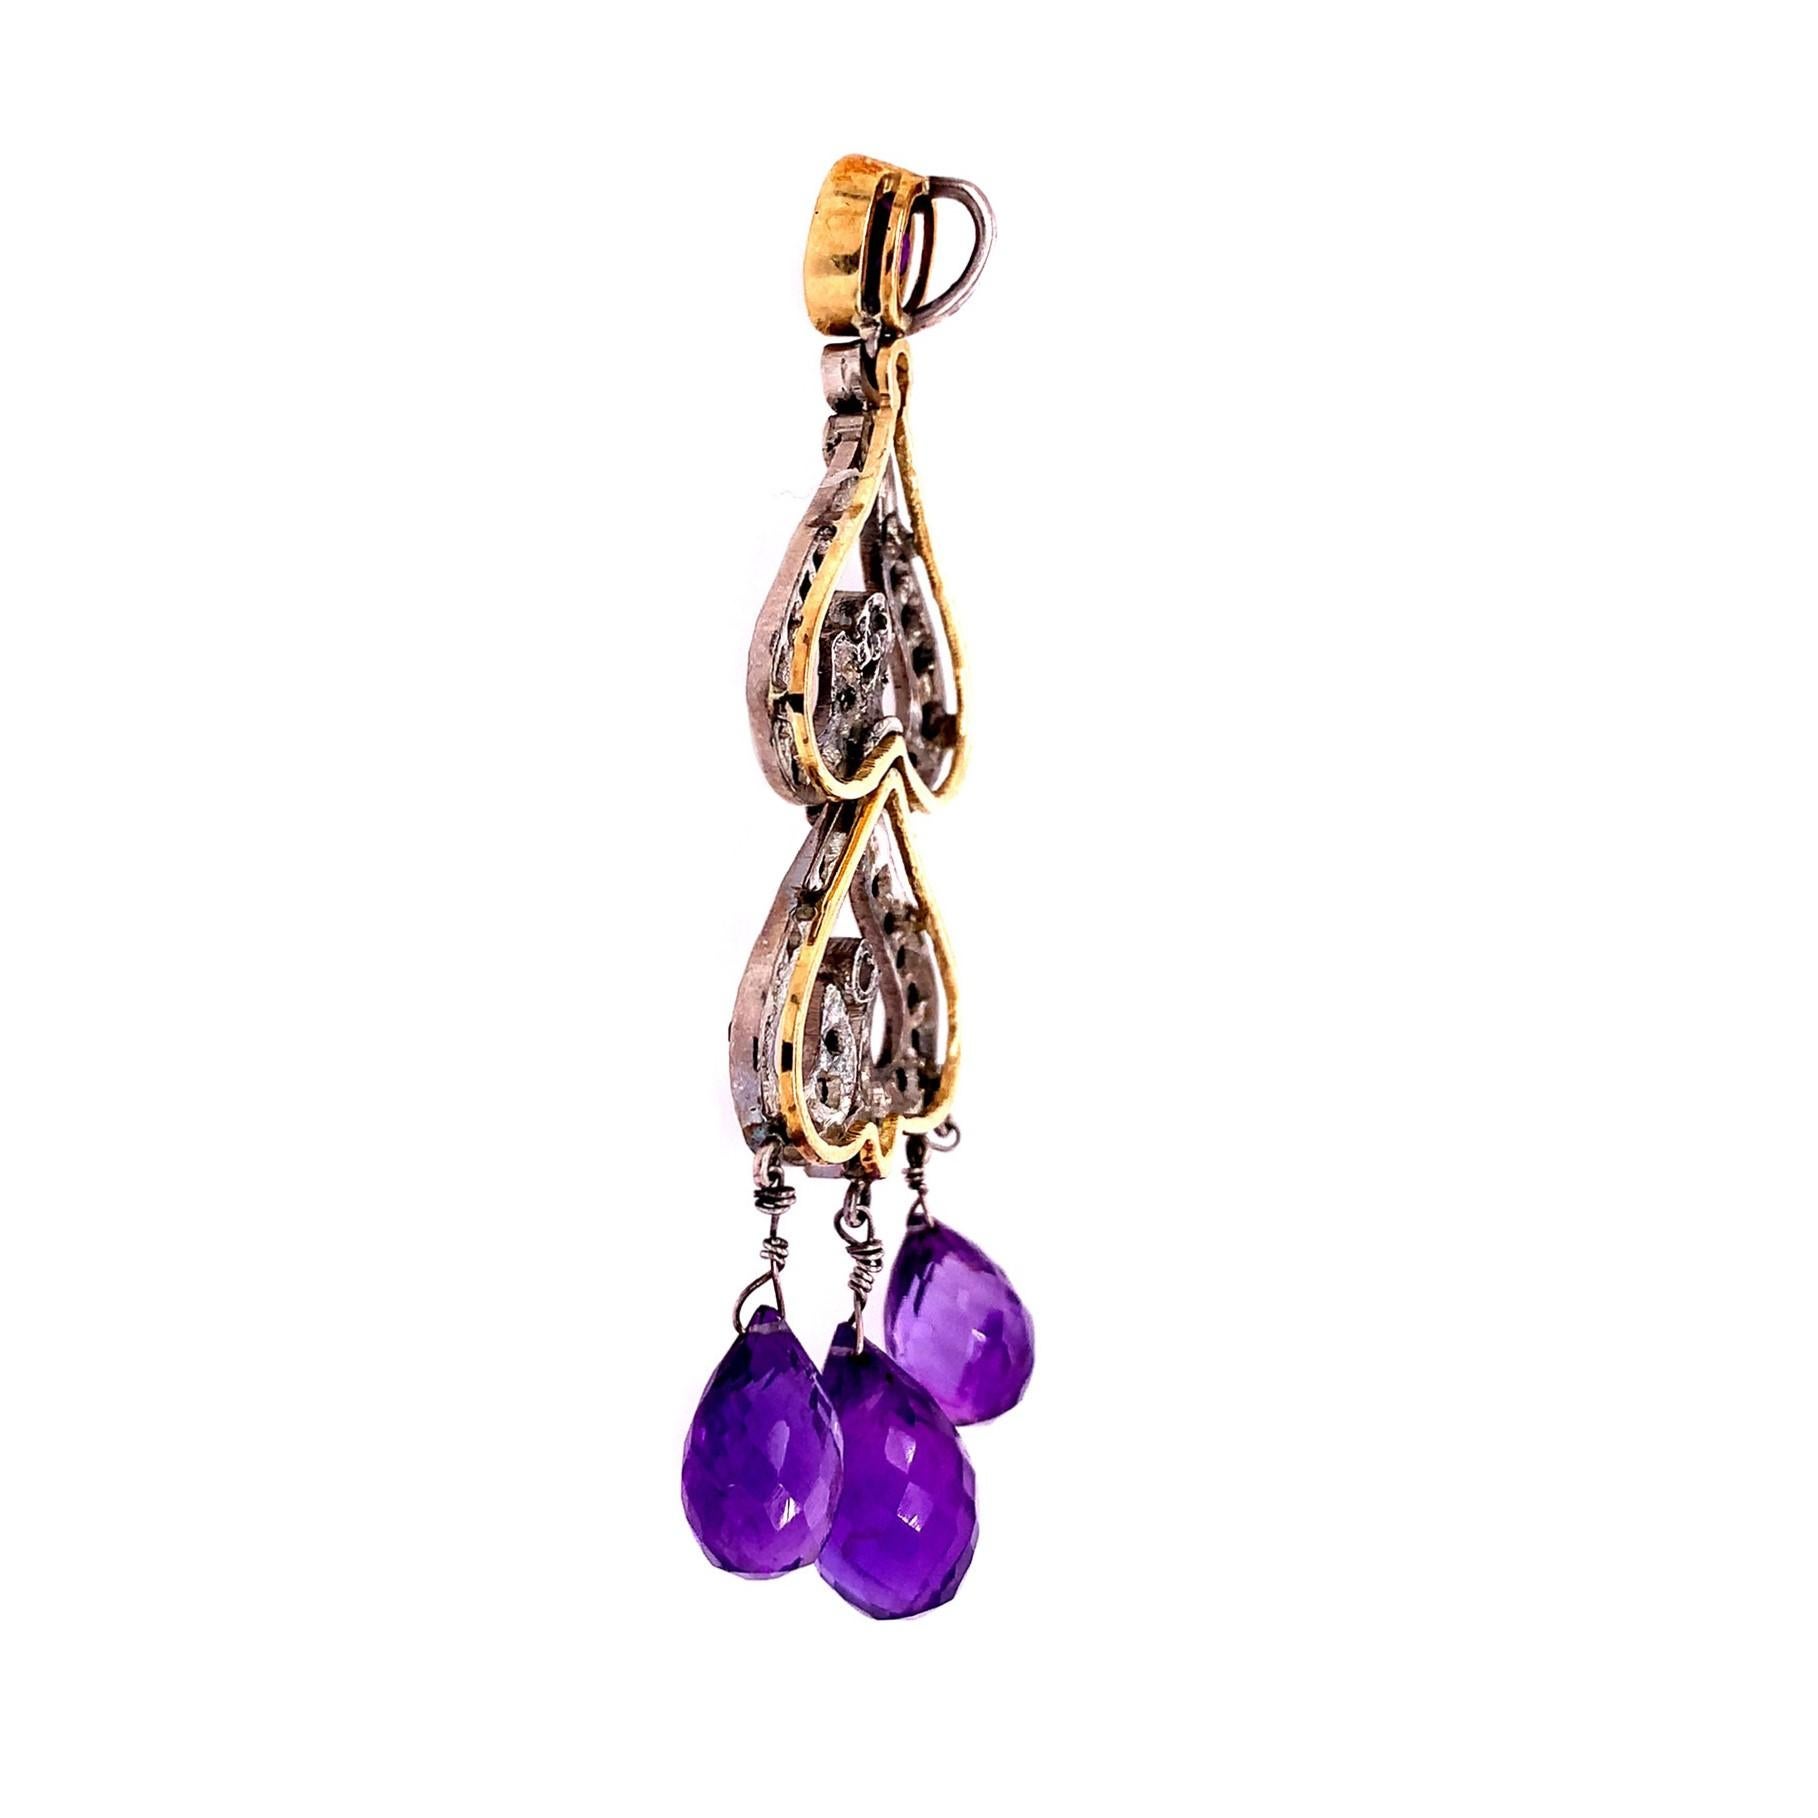 Mixed Cut Lucea New York Amethyst and Icy Diamond Pendant For Sale